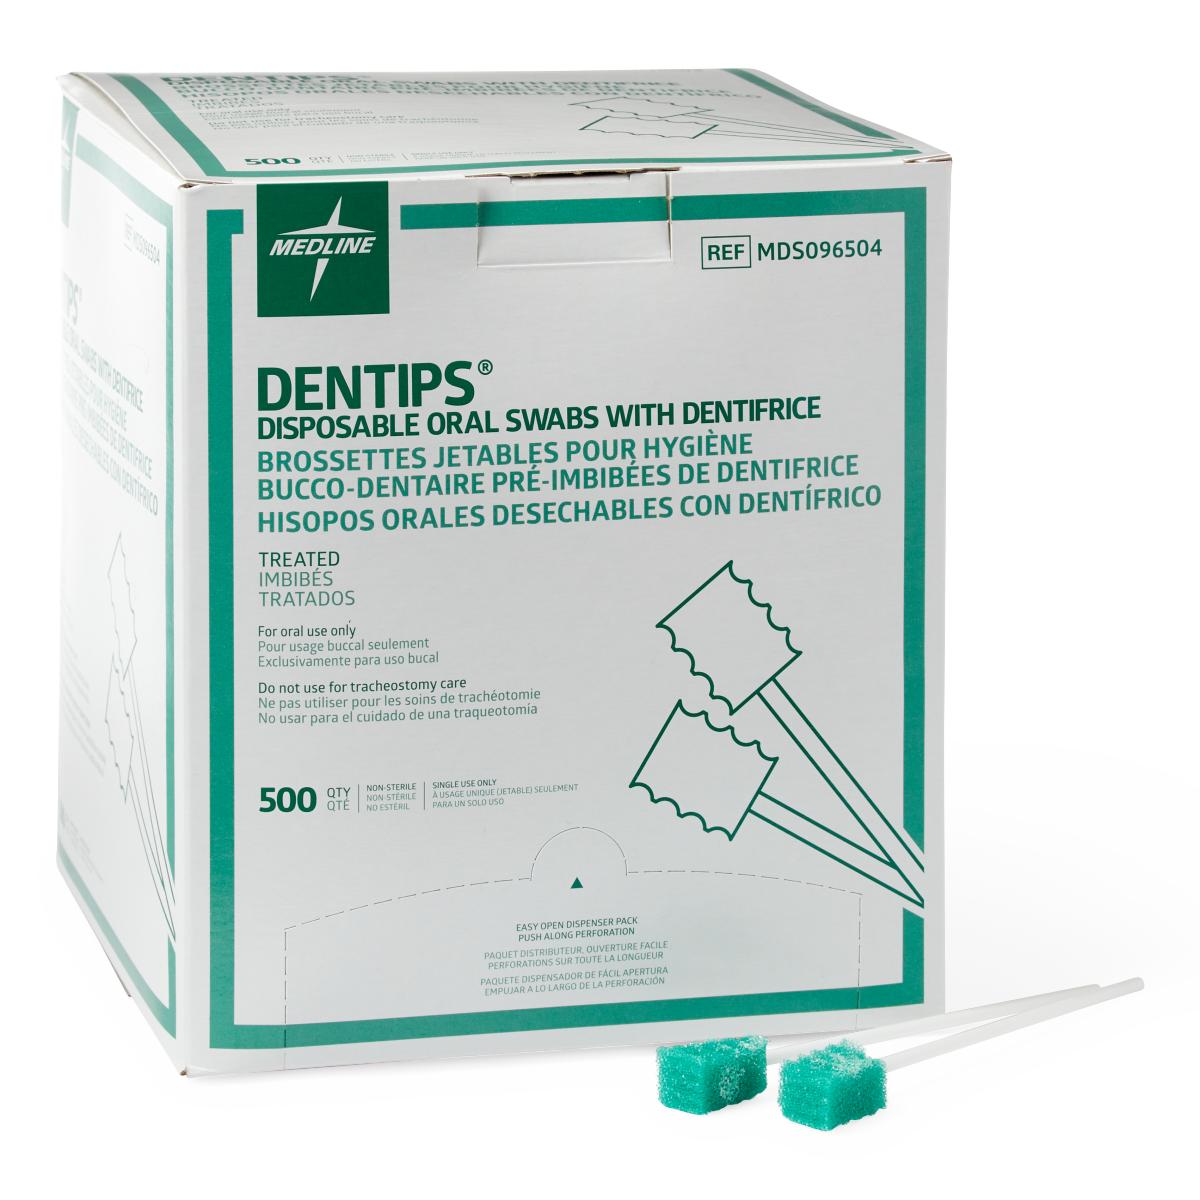 10 Each-Pack / Green / 10 Per Pack Nursing Supplies & Patient Care - MEDLINE - Wasatch Medical Supply